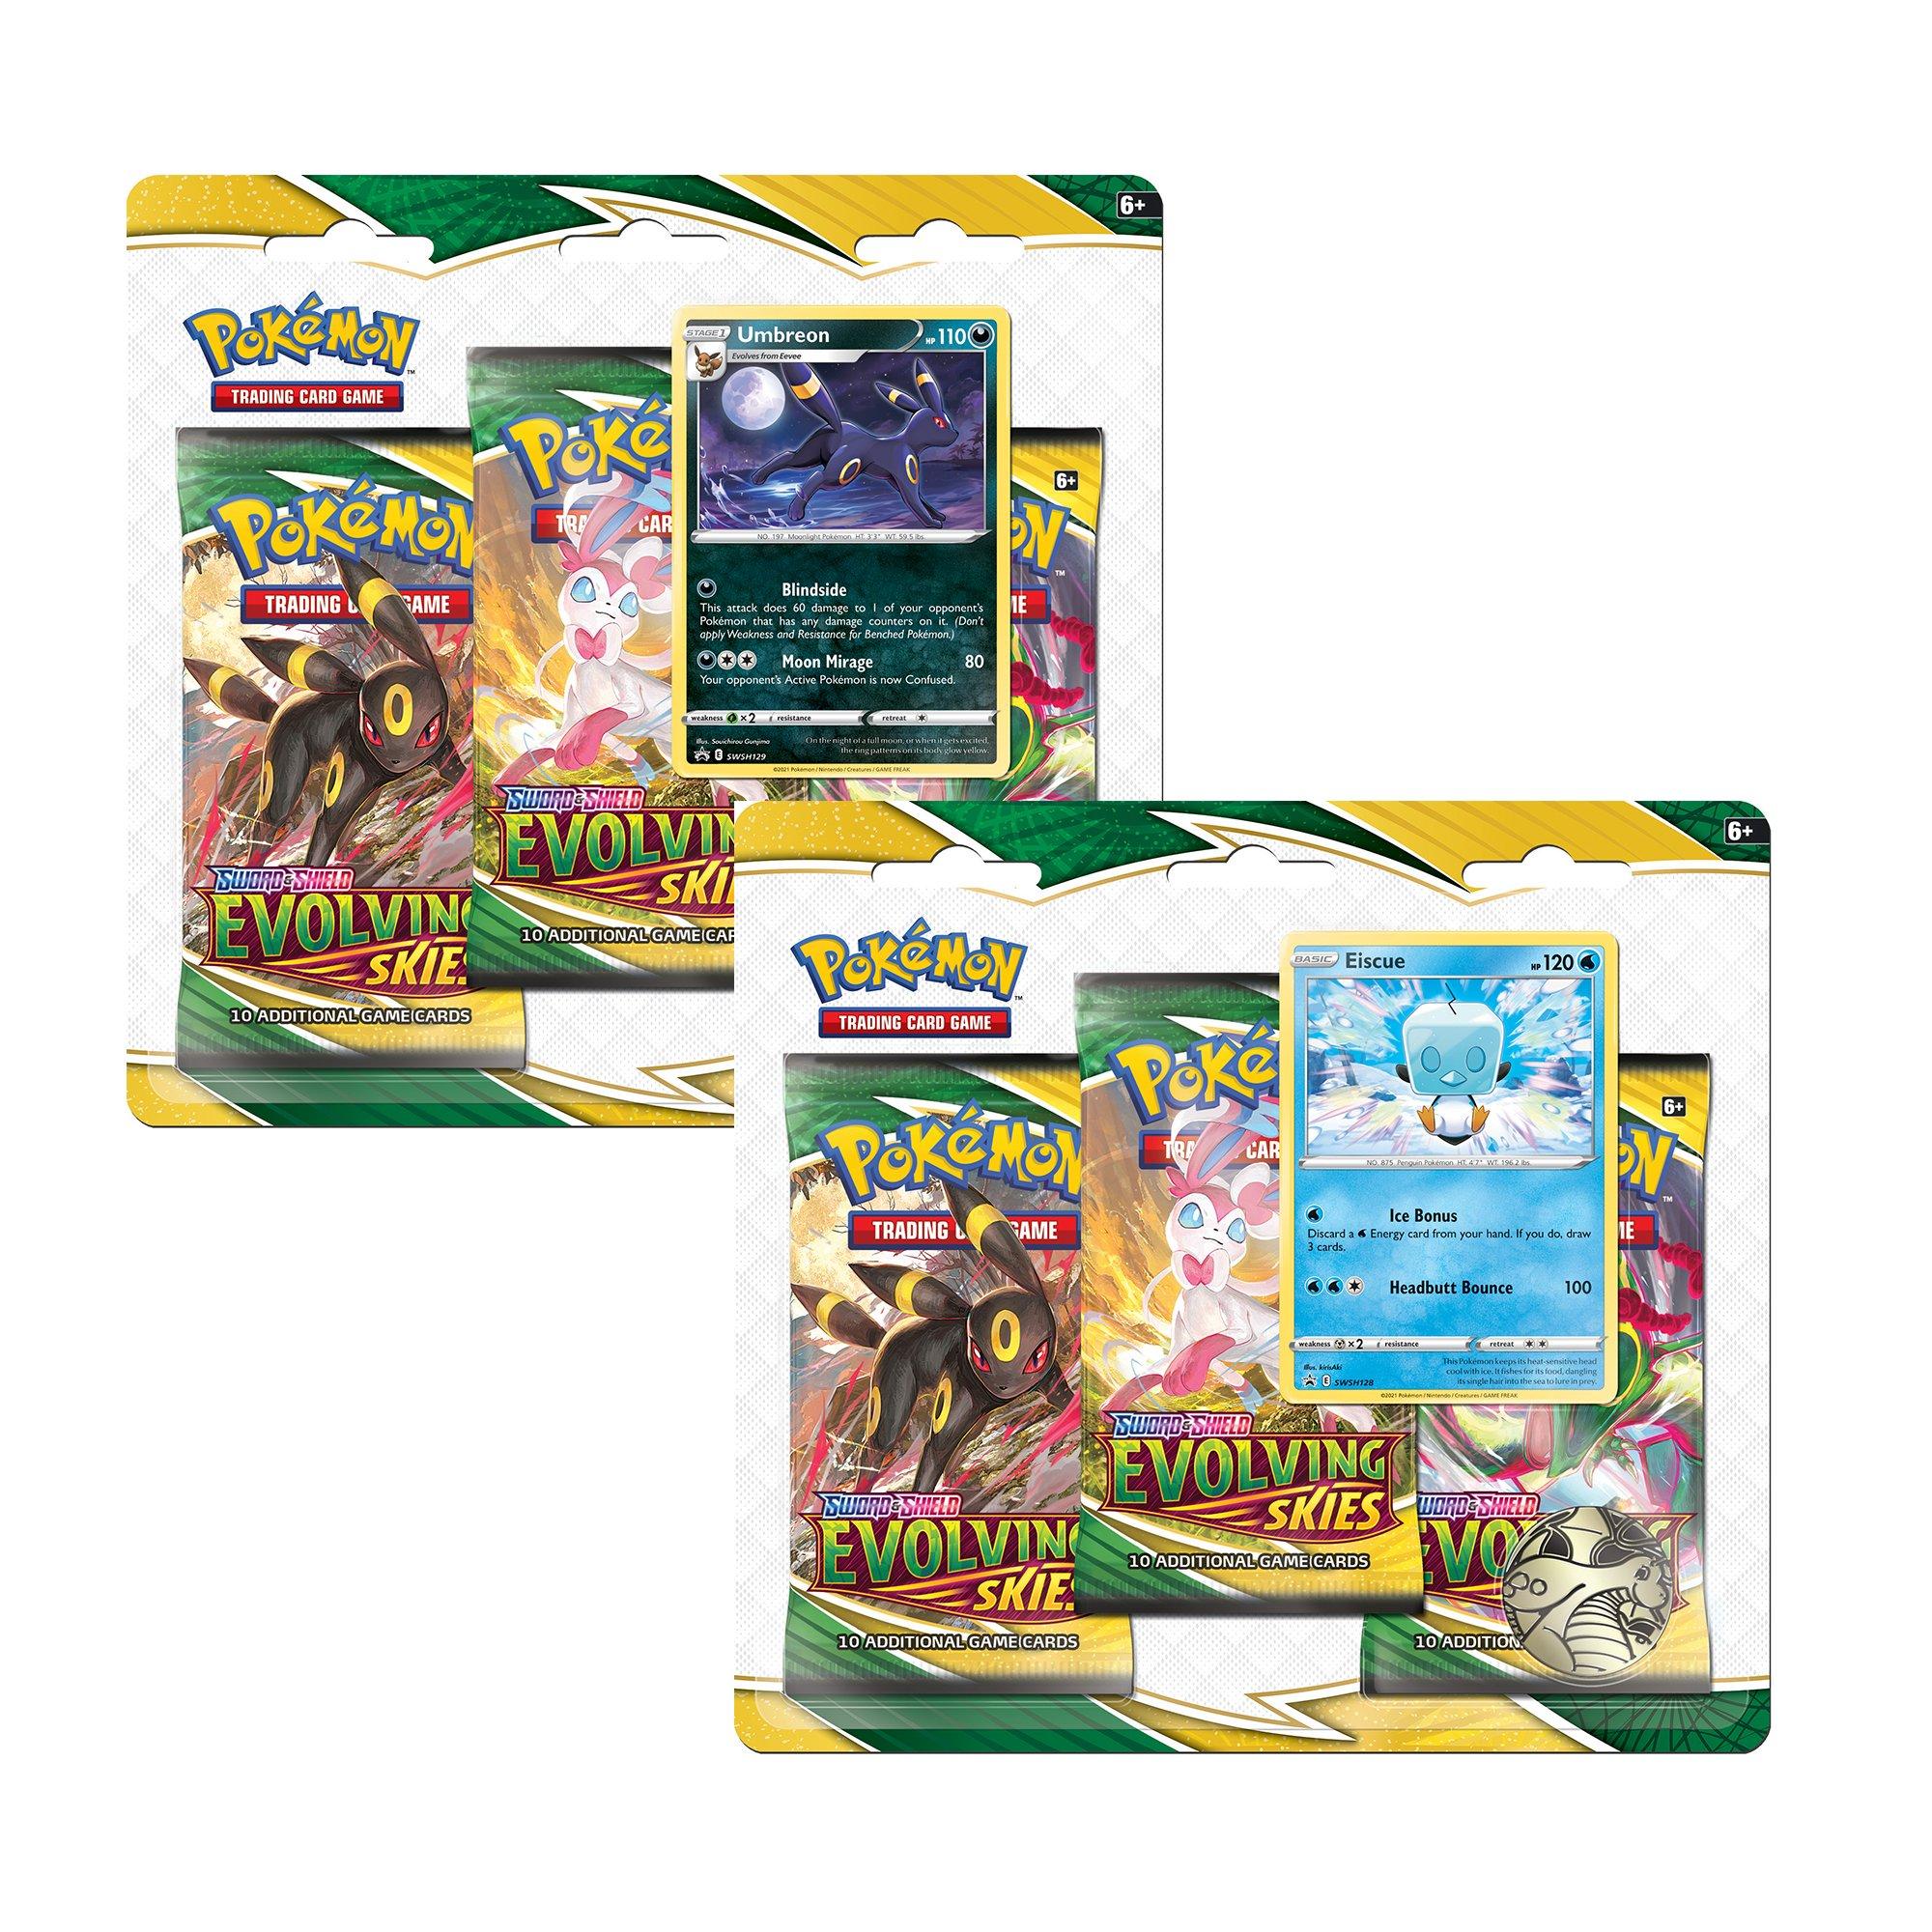 POKEMON TRADE & PLAY DAY KIT BOOSTER PACK plus 3 packs of 3 cards